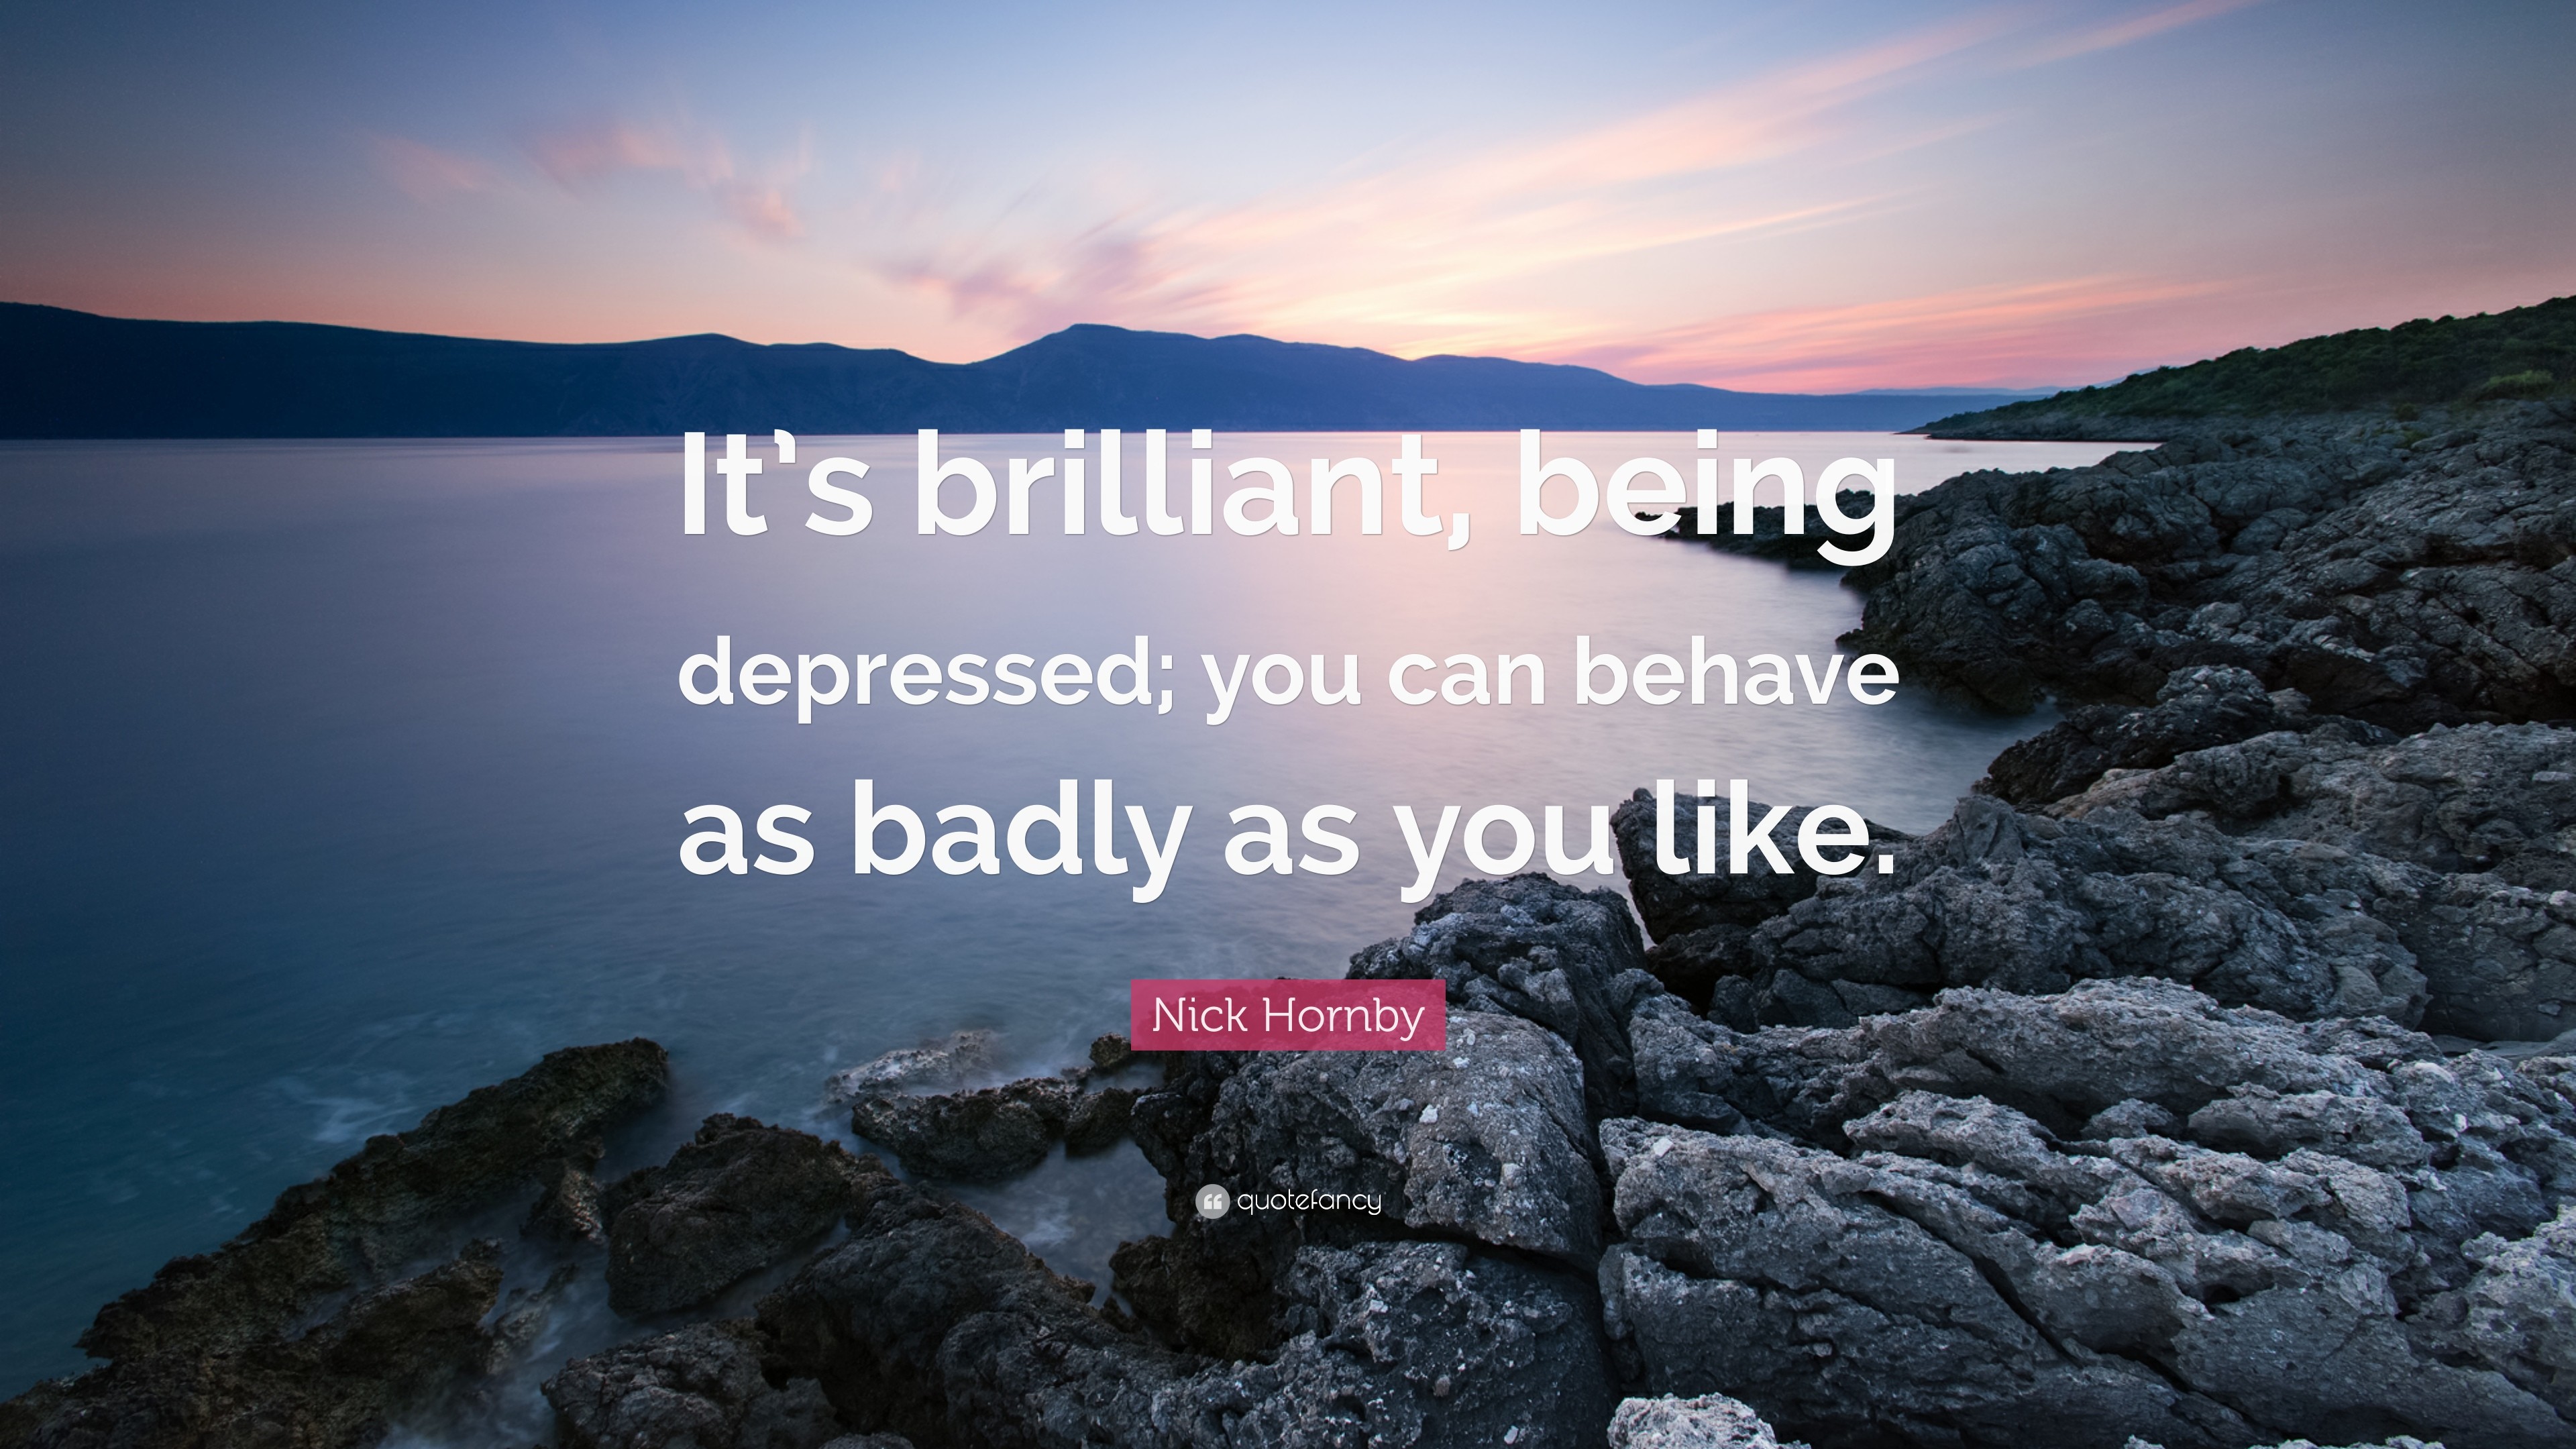 3840x2160 Nick Hornby Quote: “It's brilliant, being depressed; you can behave as badly